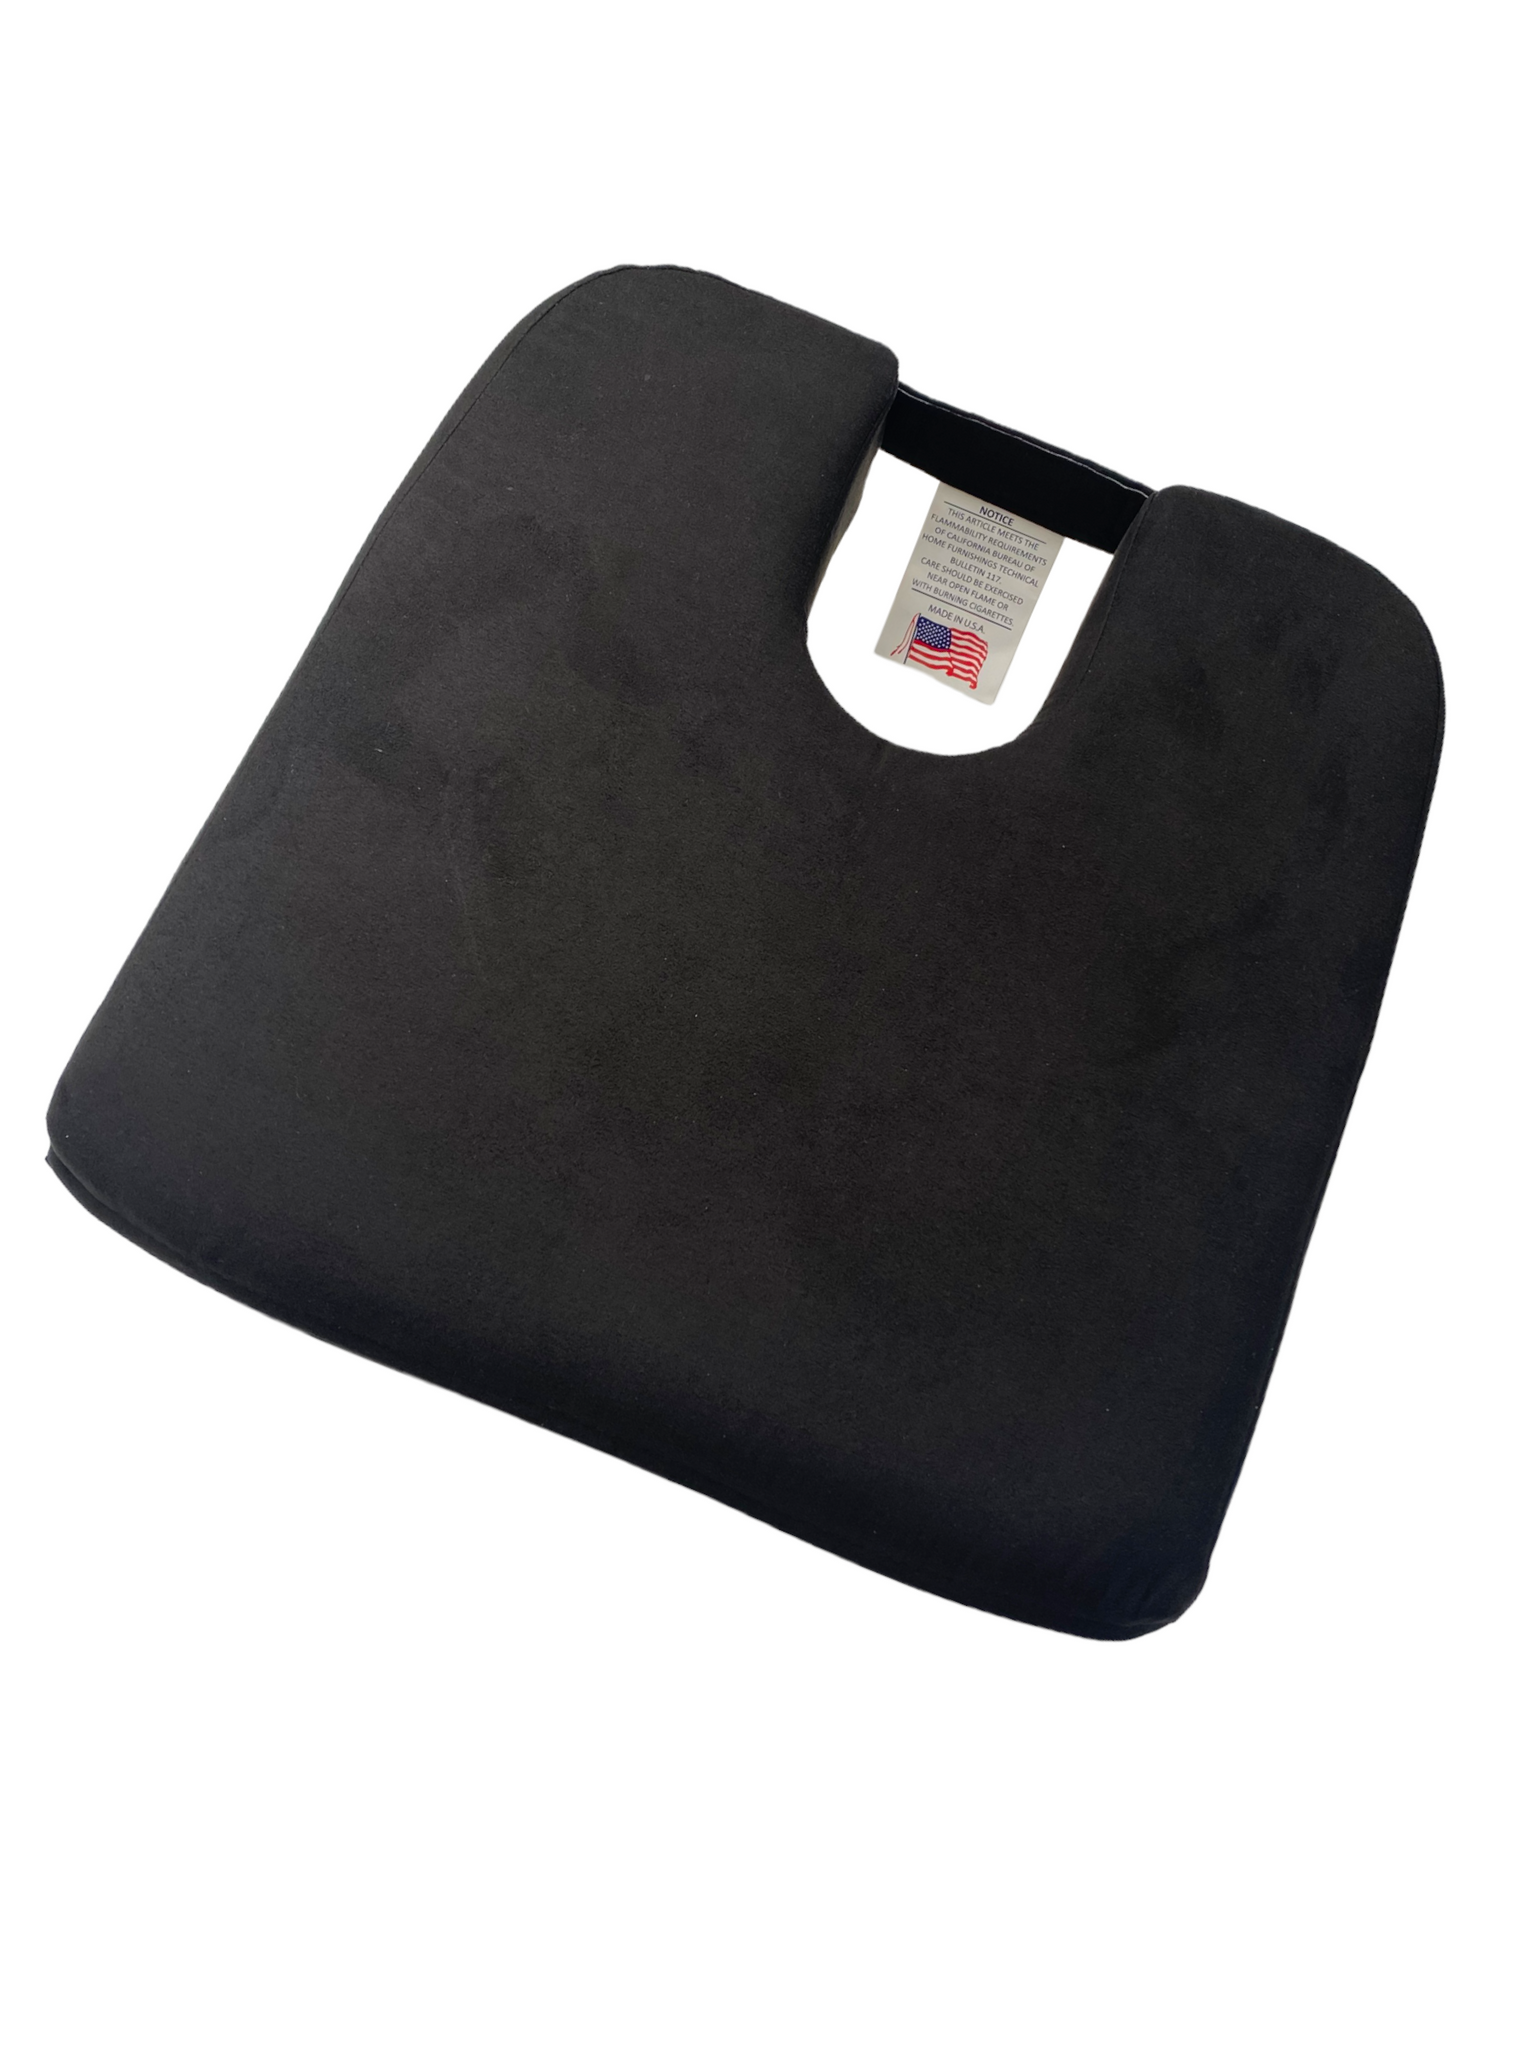 Car-Cush® 13 x 16 Seat Cushion Relieves Pain, Pressure From Sitting